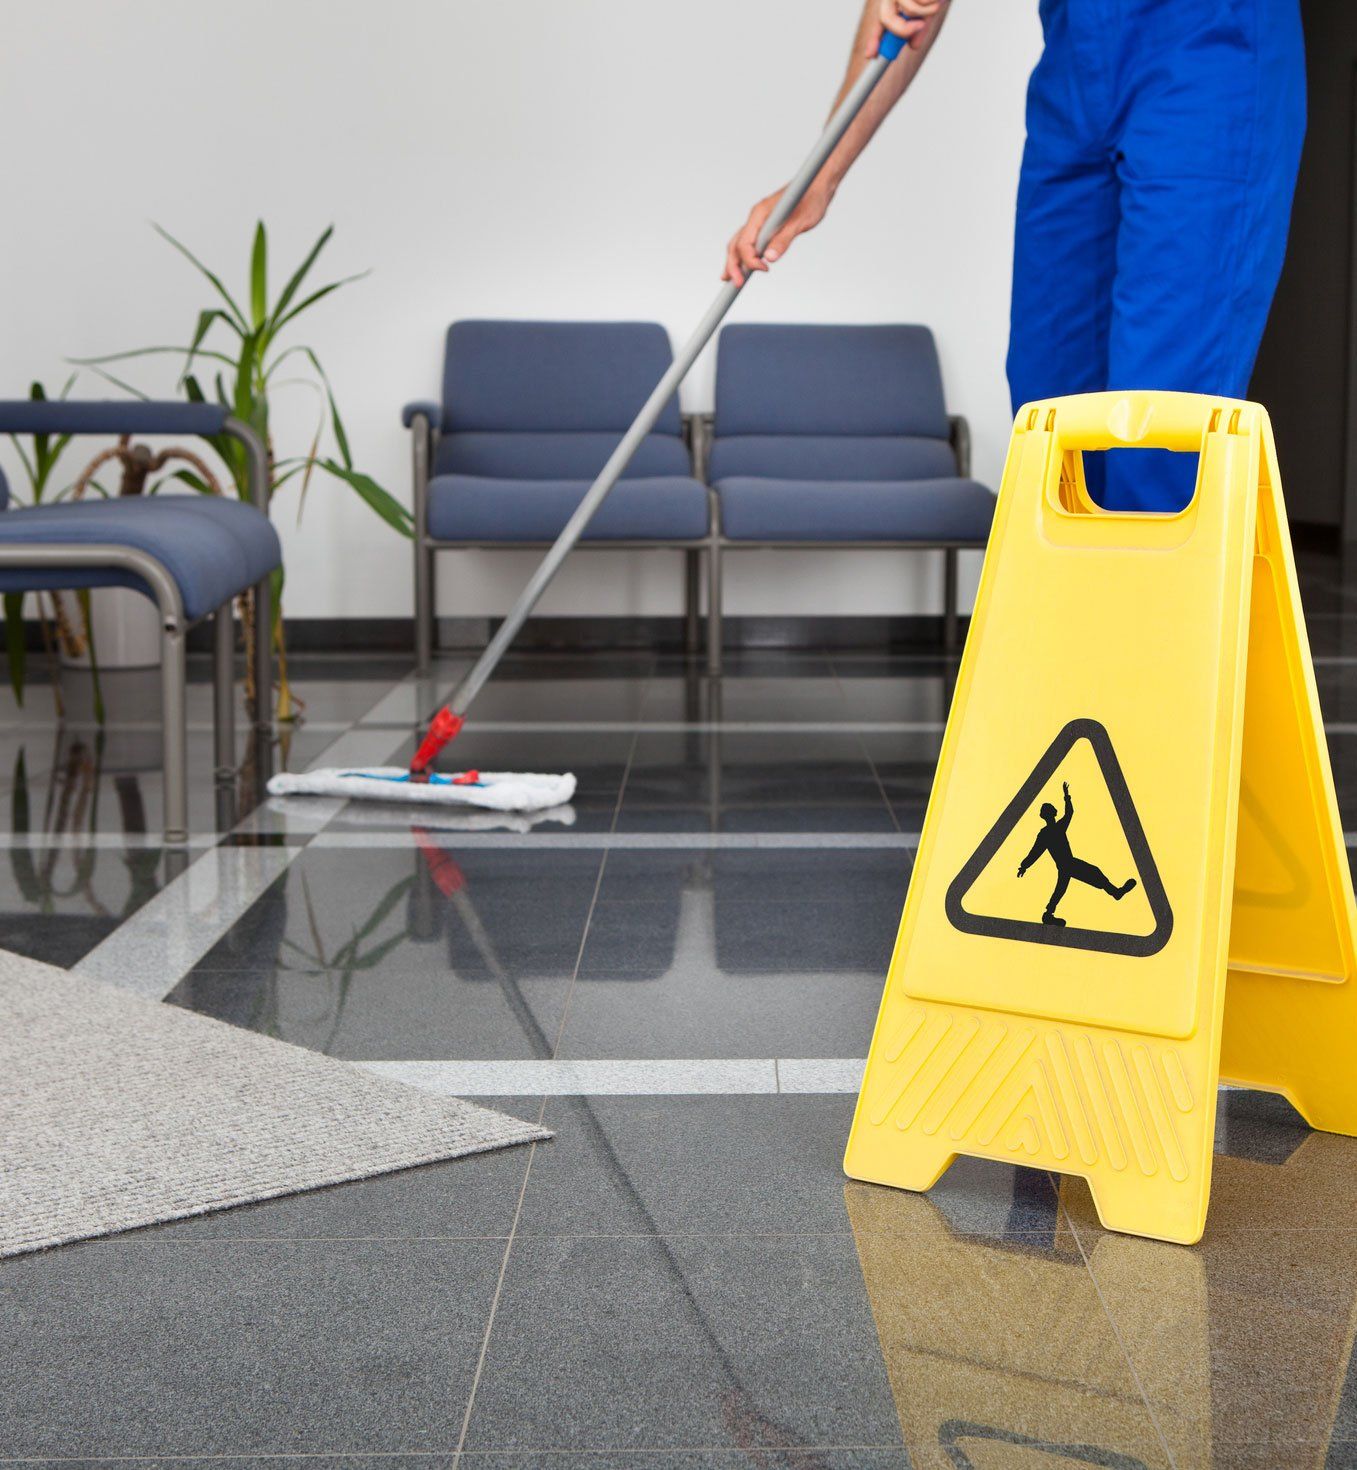 Janitorial Services — Mopping the Waiting Area Floor in Will County